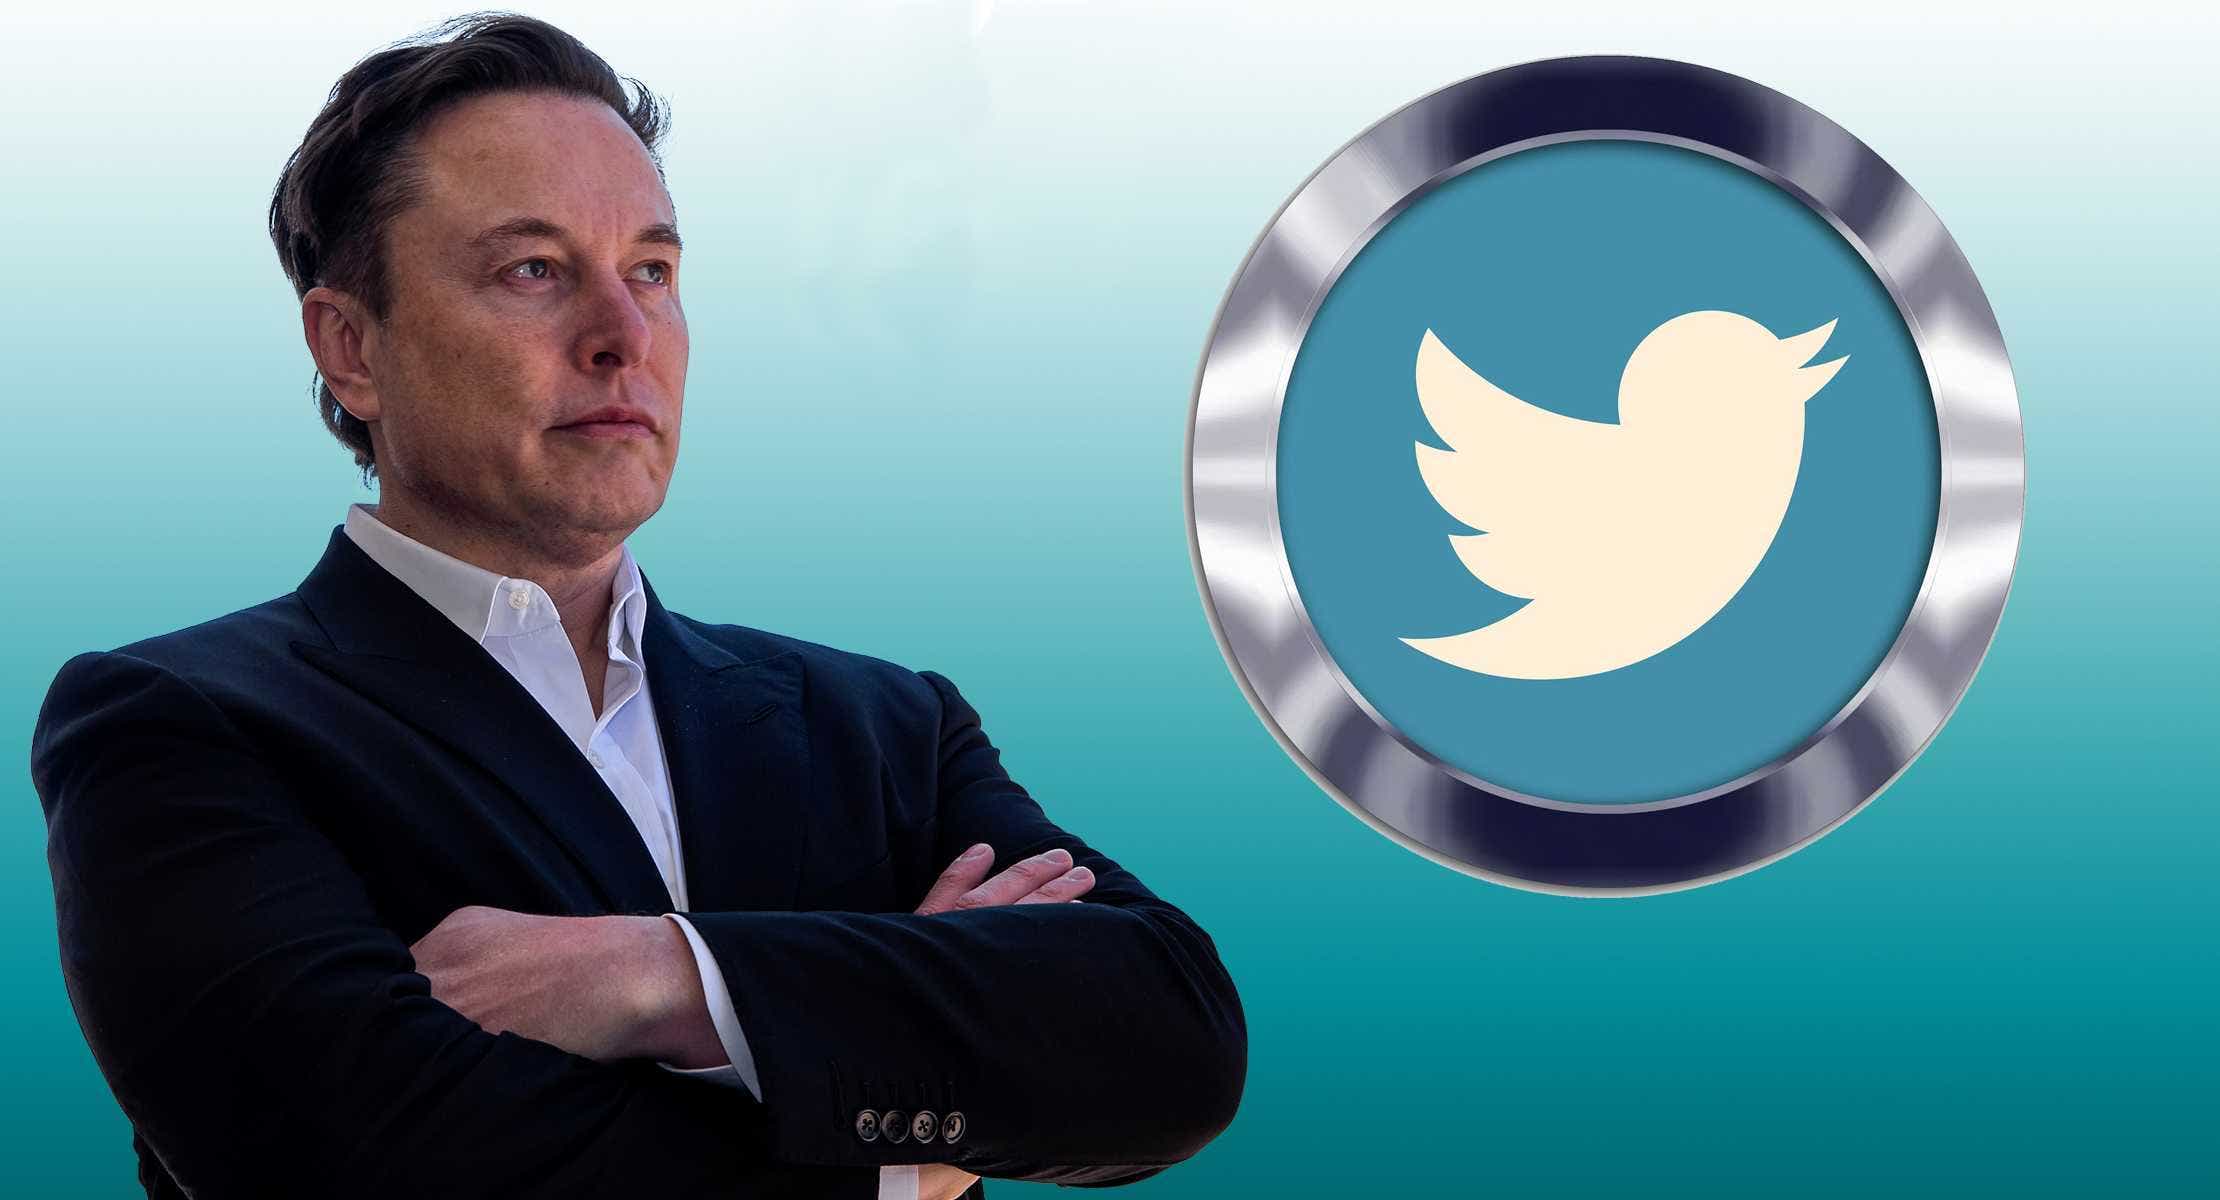 Musk Hasn't Sold More Tesla Shares To Fund $44B Twitter Deal: Could Overhang Be Gone?